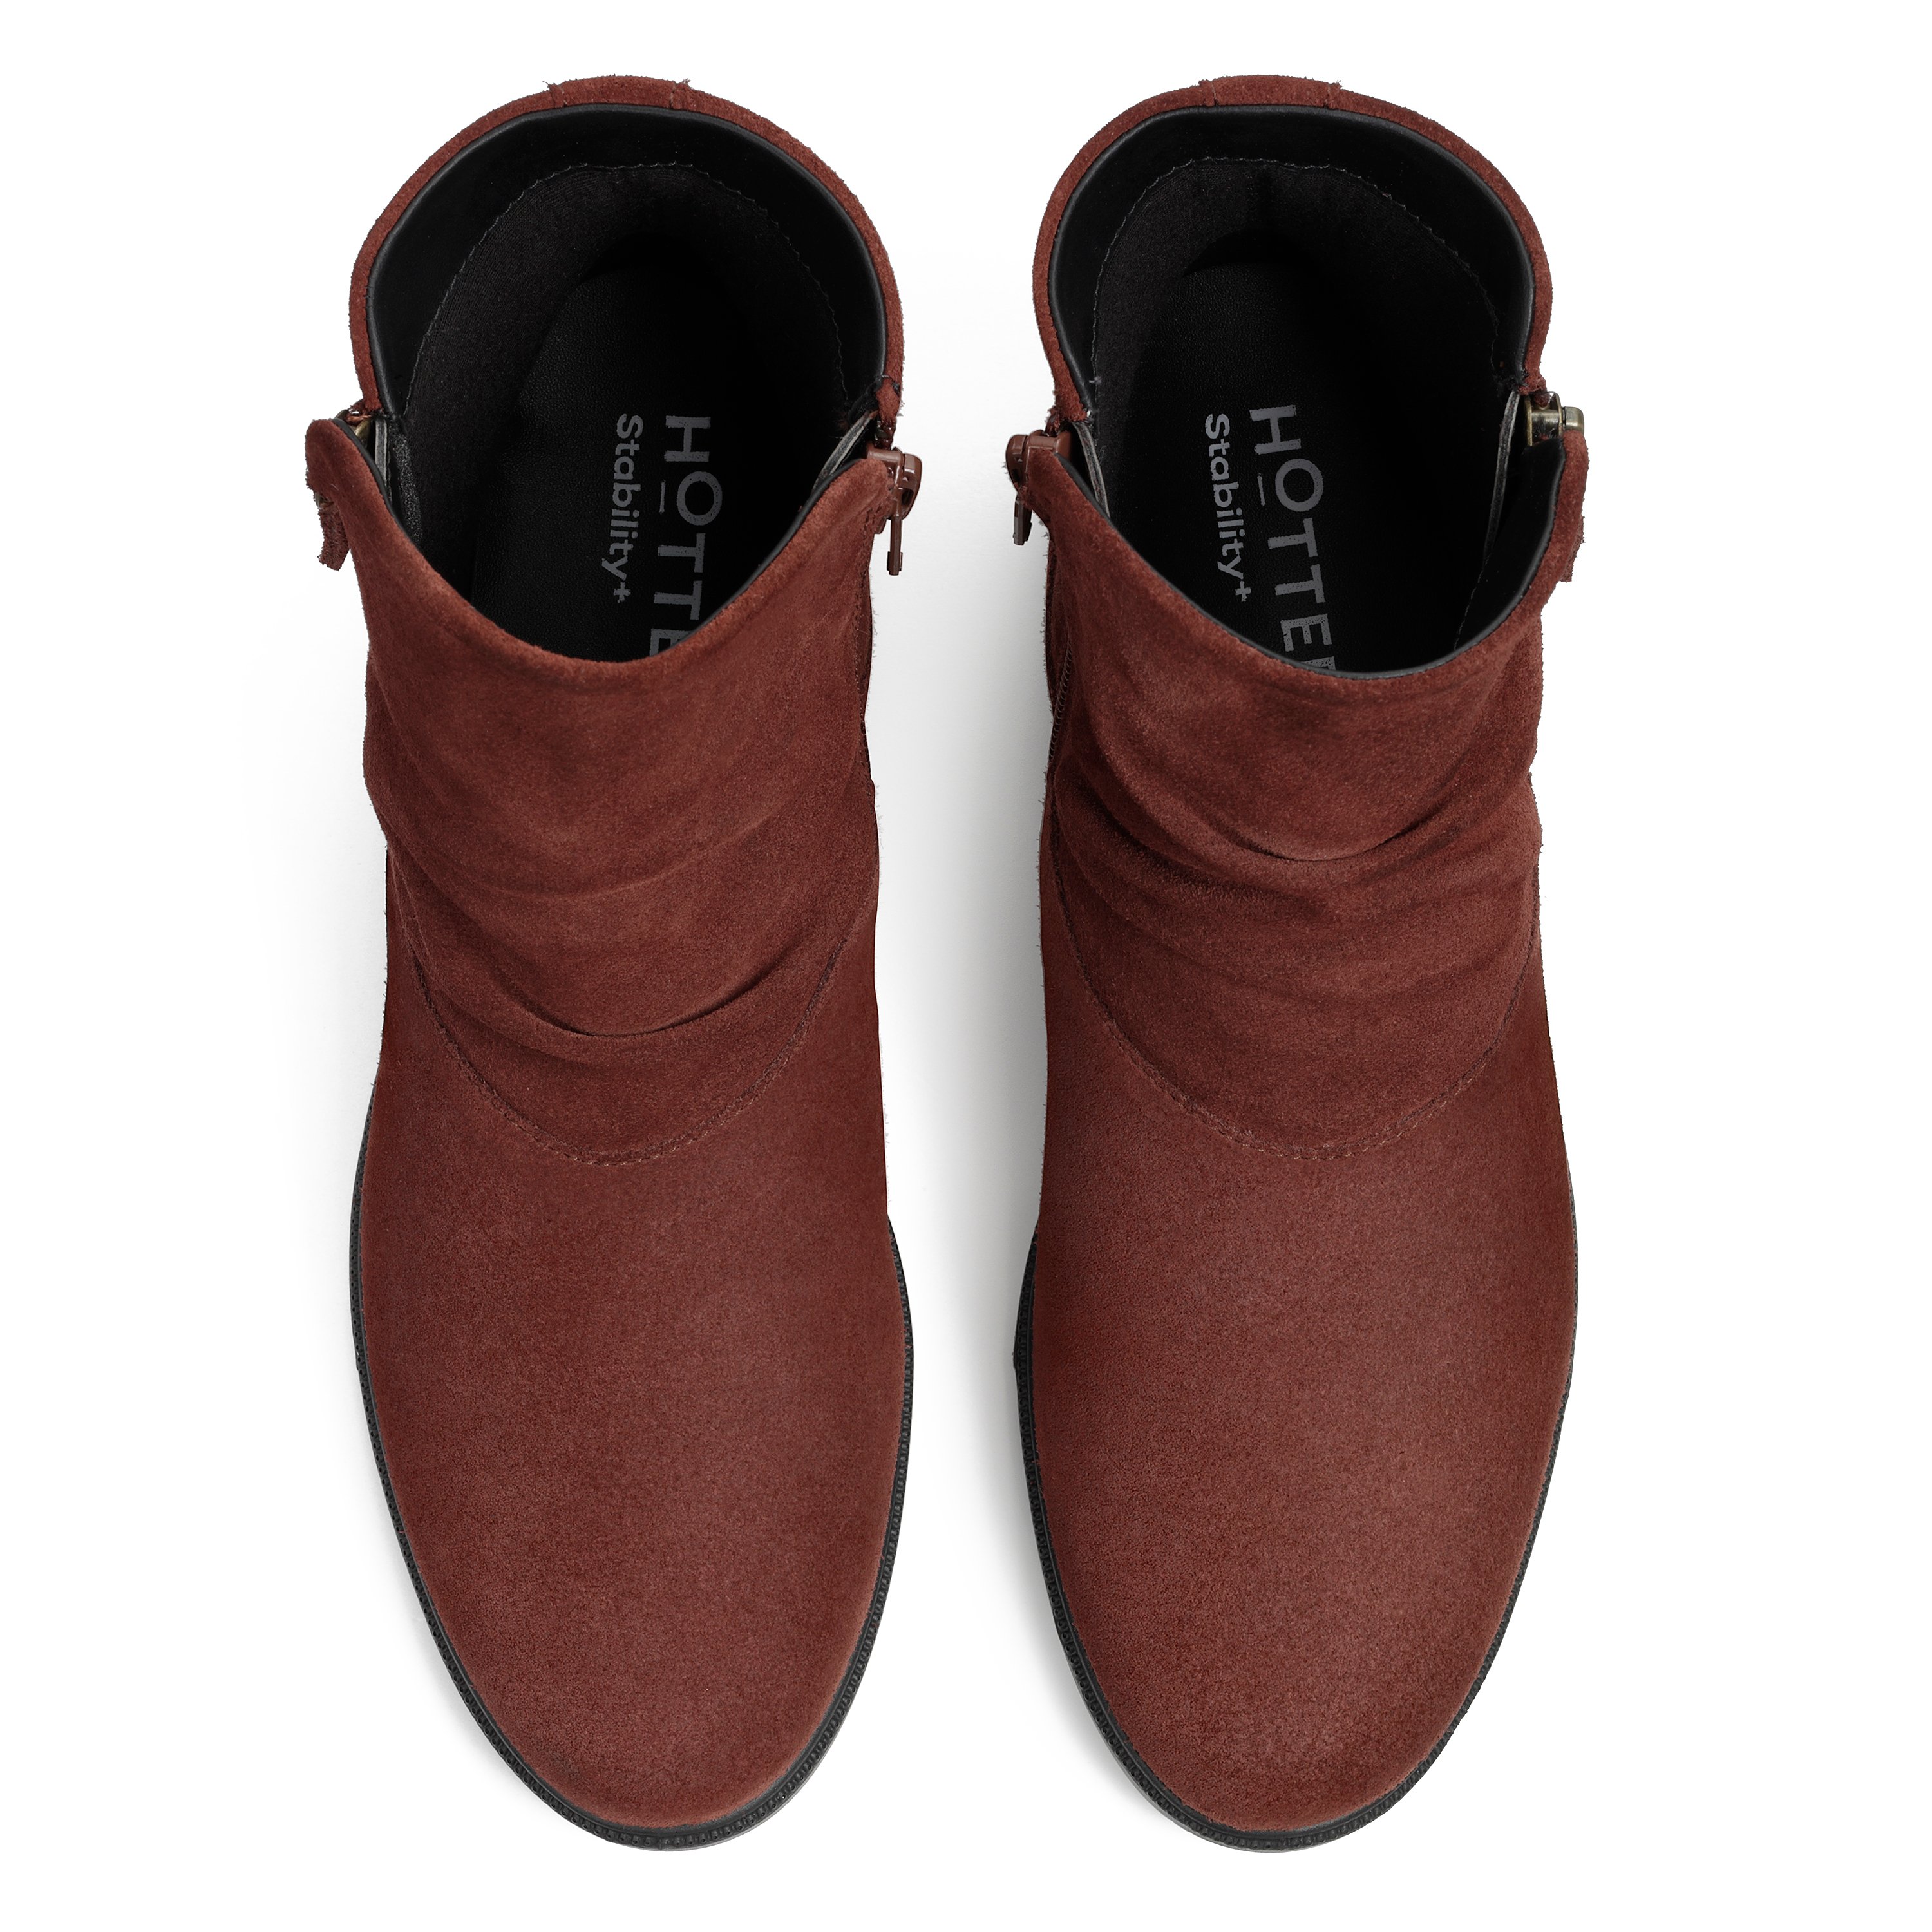 Chester II Boots